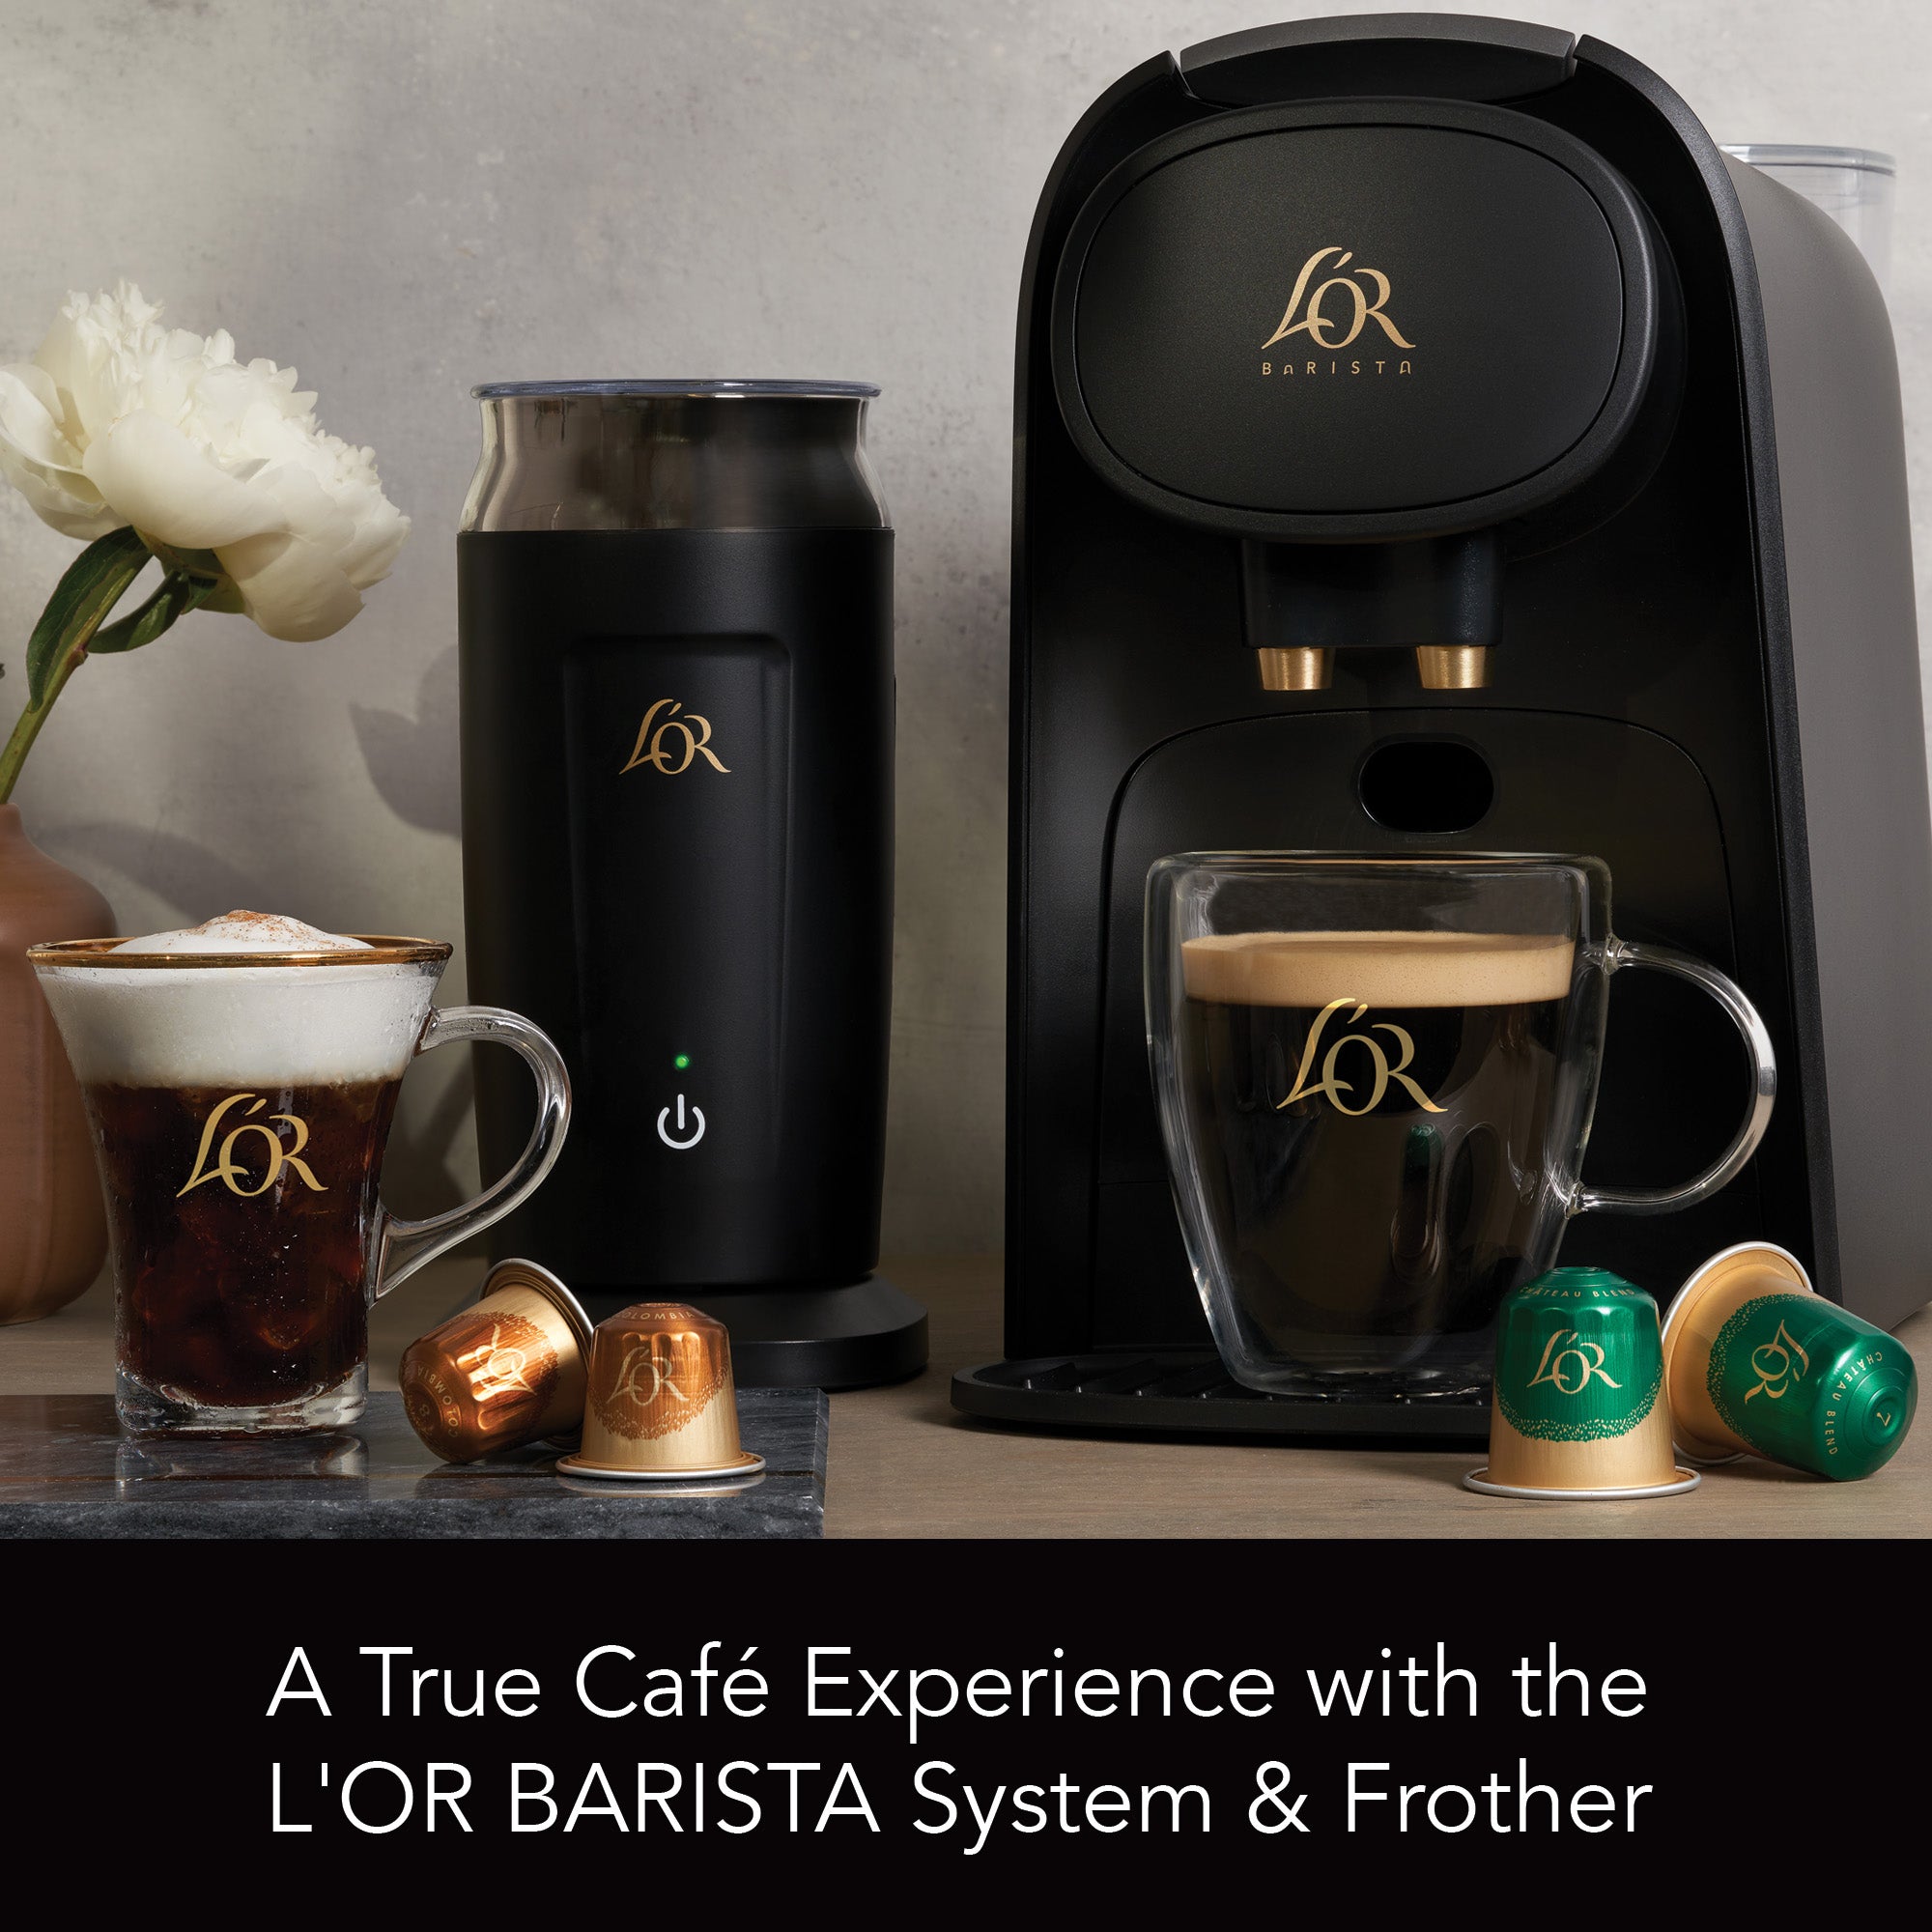 Image of frother with L'OR BARISTA System